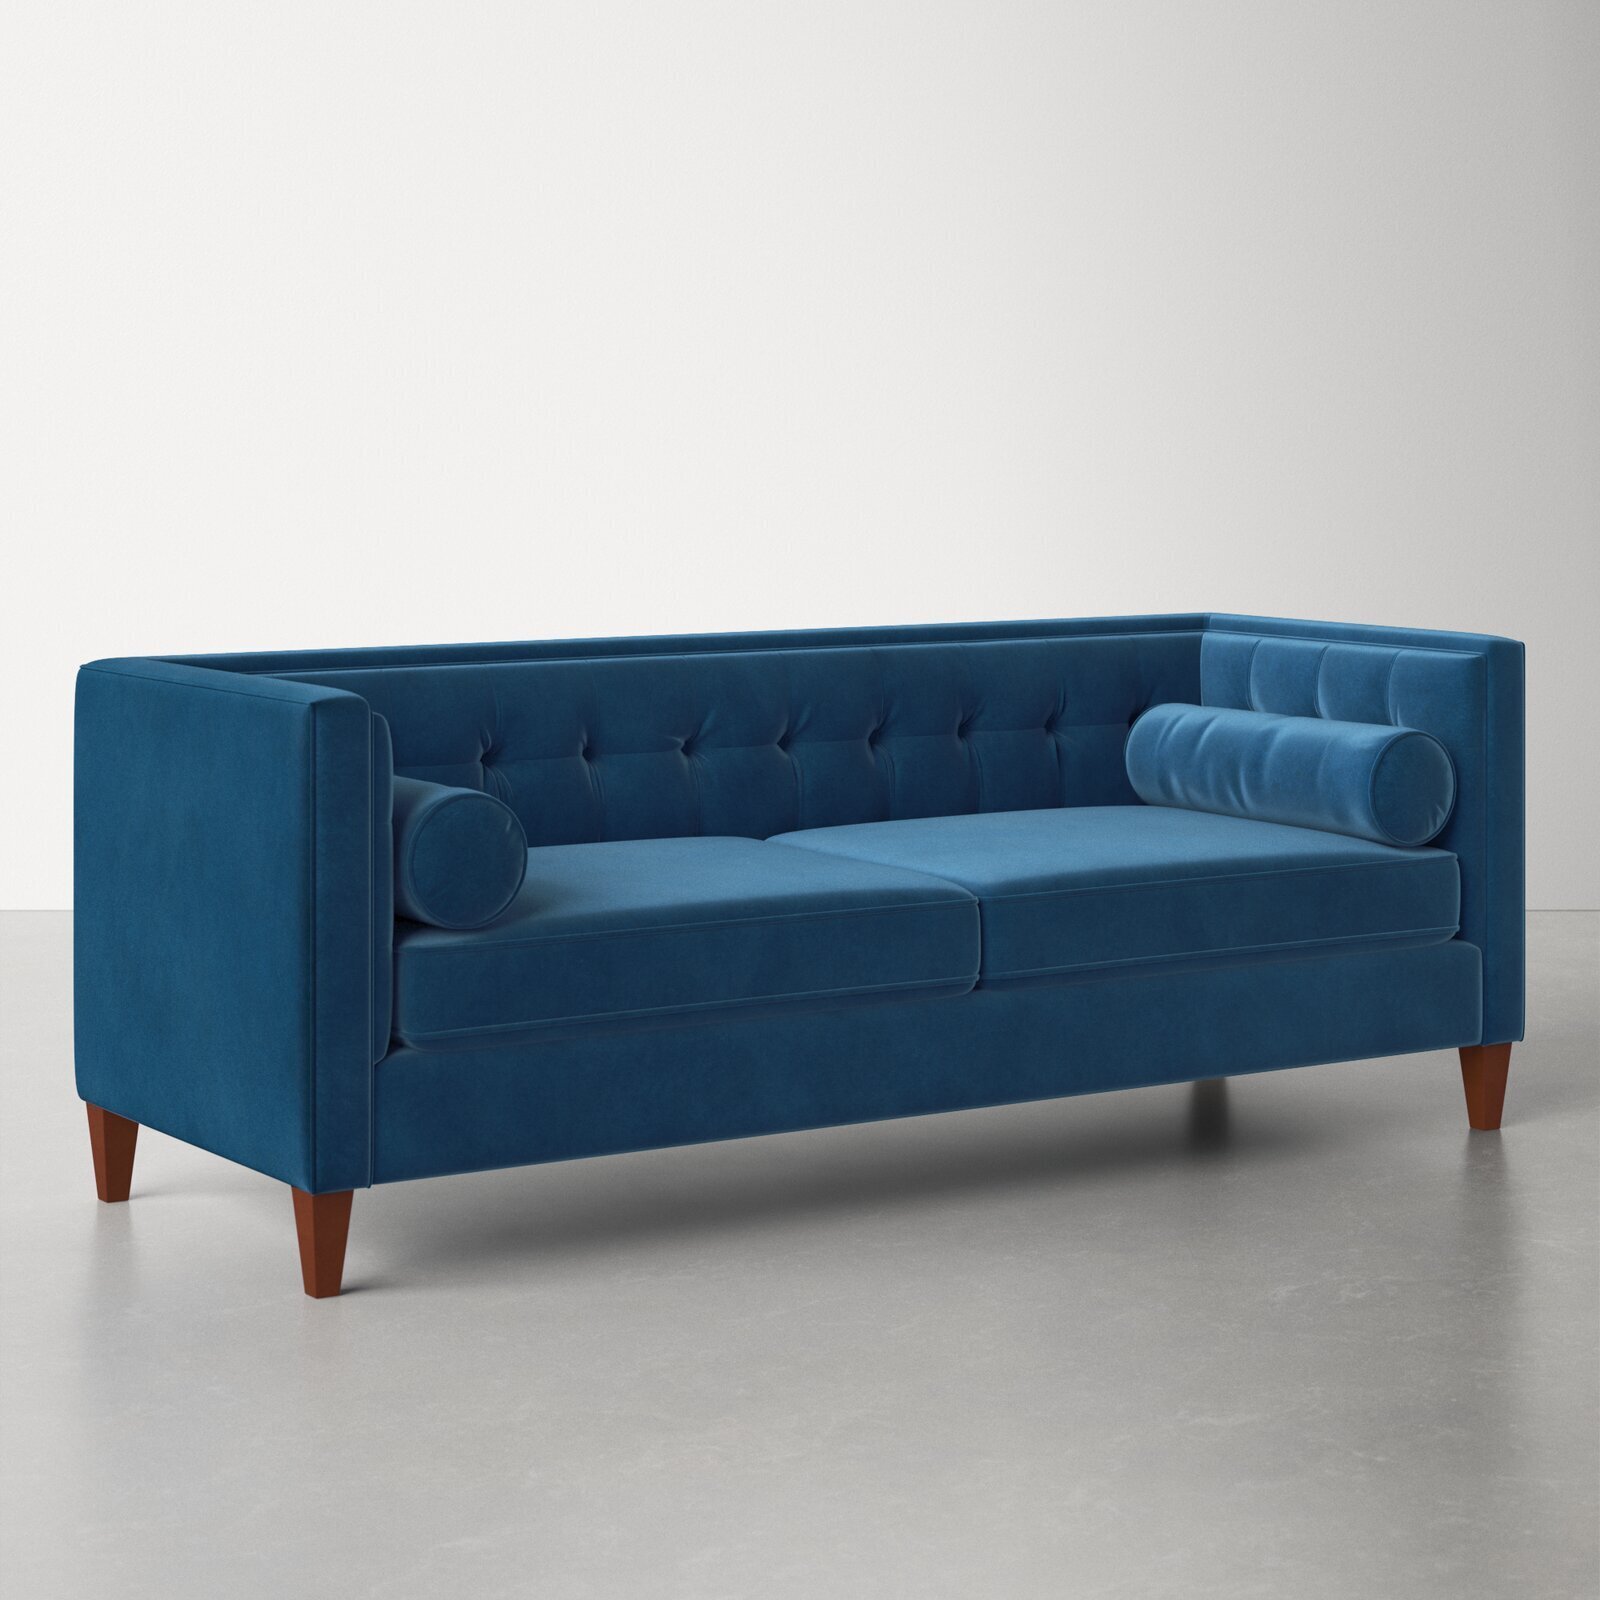 Teal Tufted Sofa with Boxy Frame